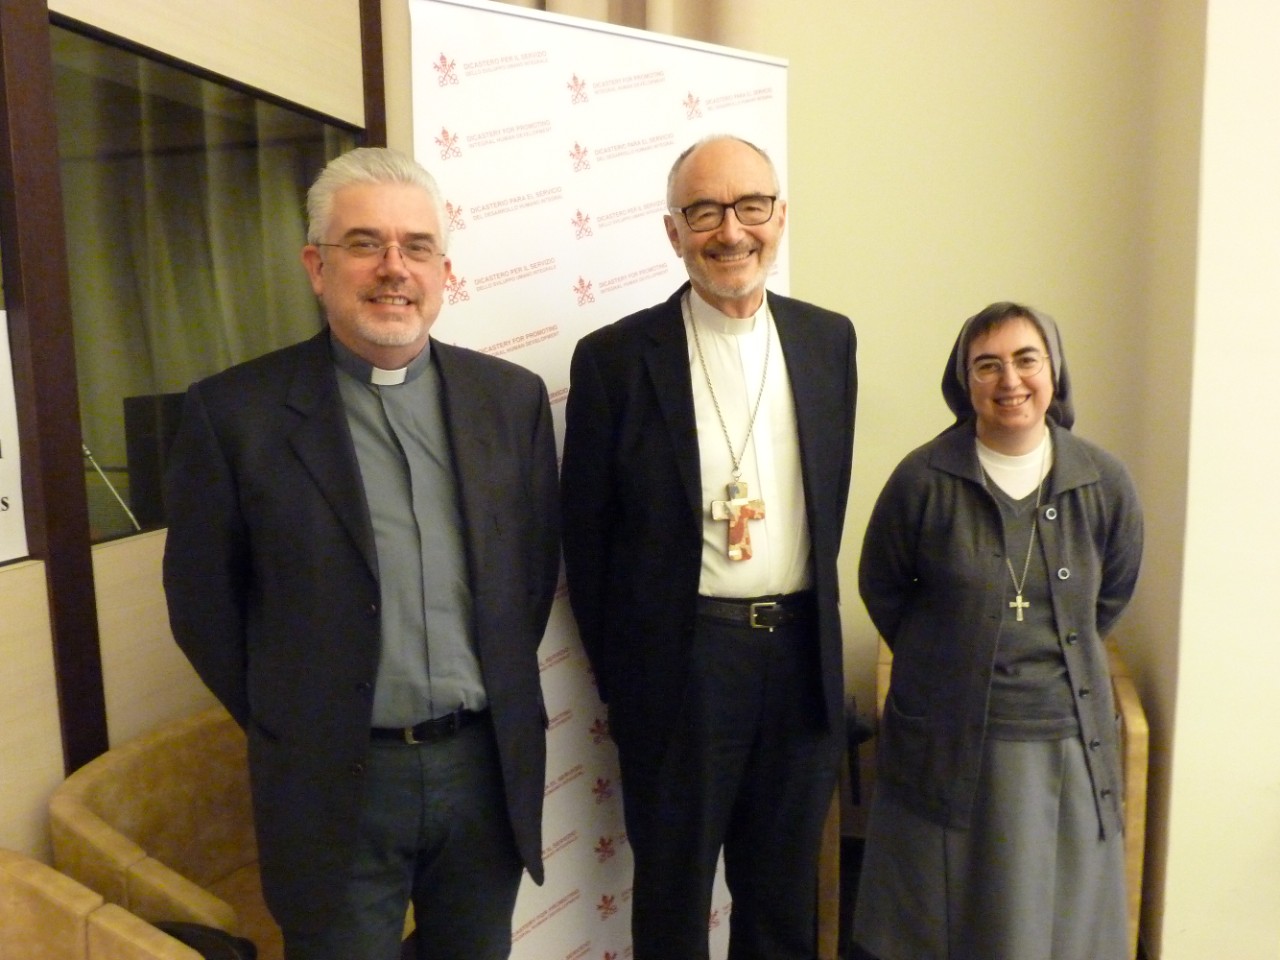 A new organization for the Dicastery for Promoting Integral Human Development